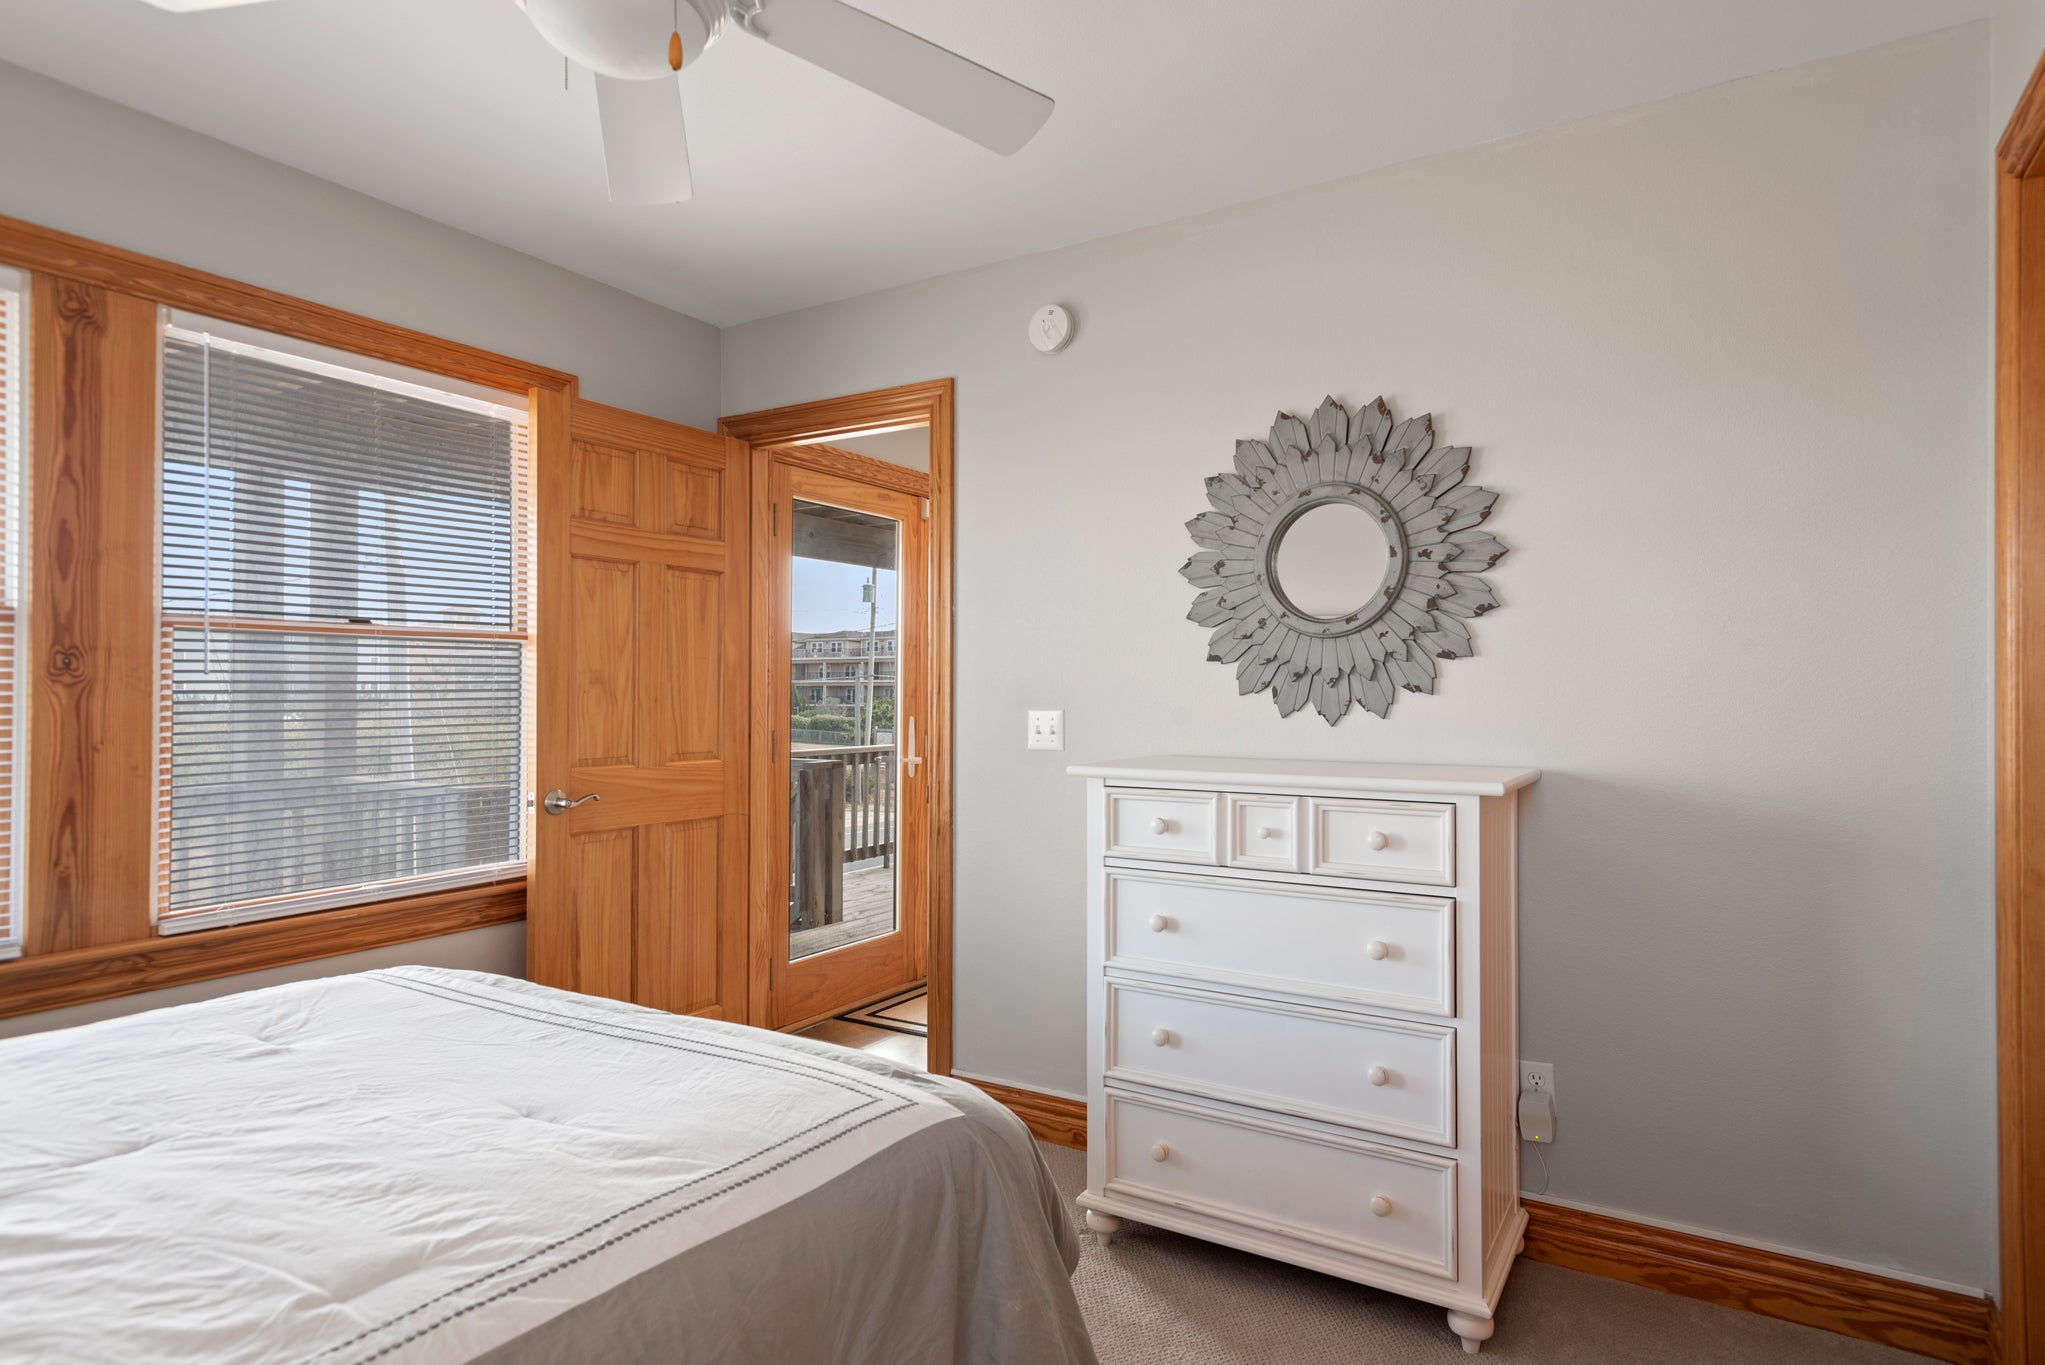 KDN2208: Sea A Chance | Mid Level Bedroom 1